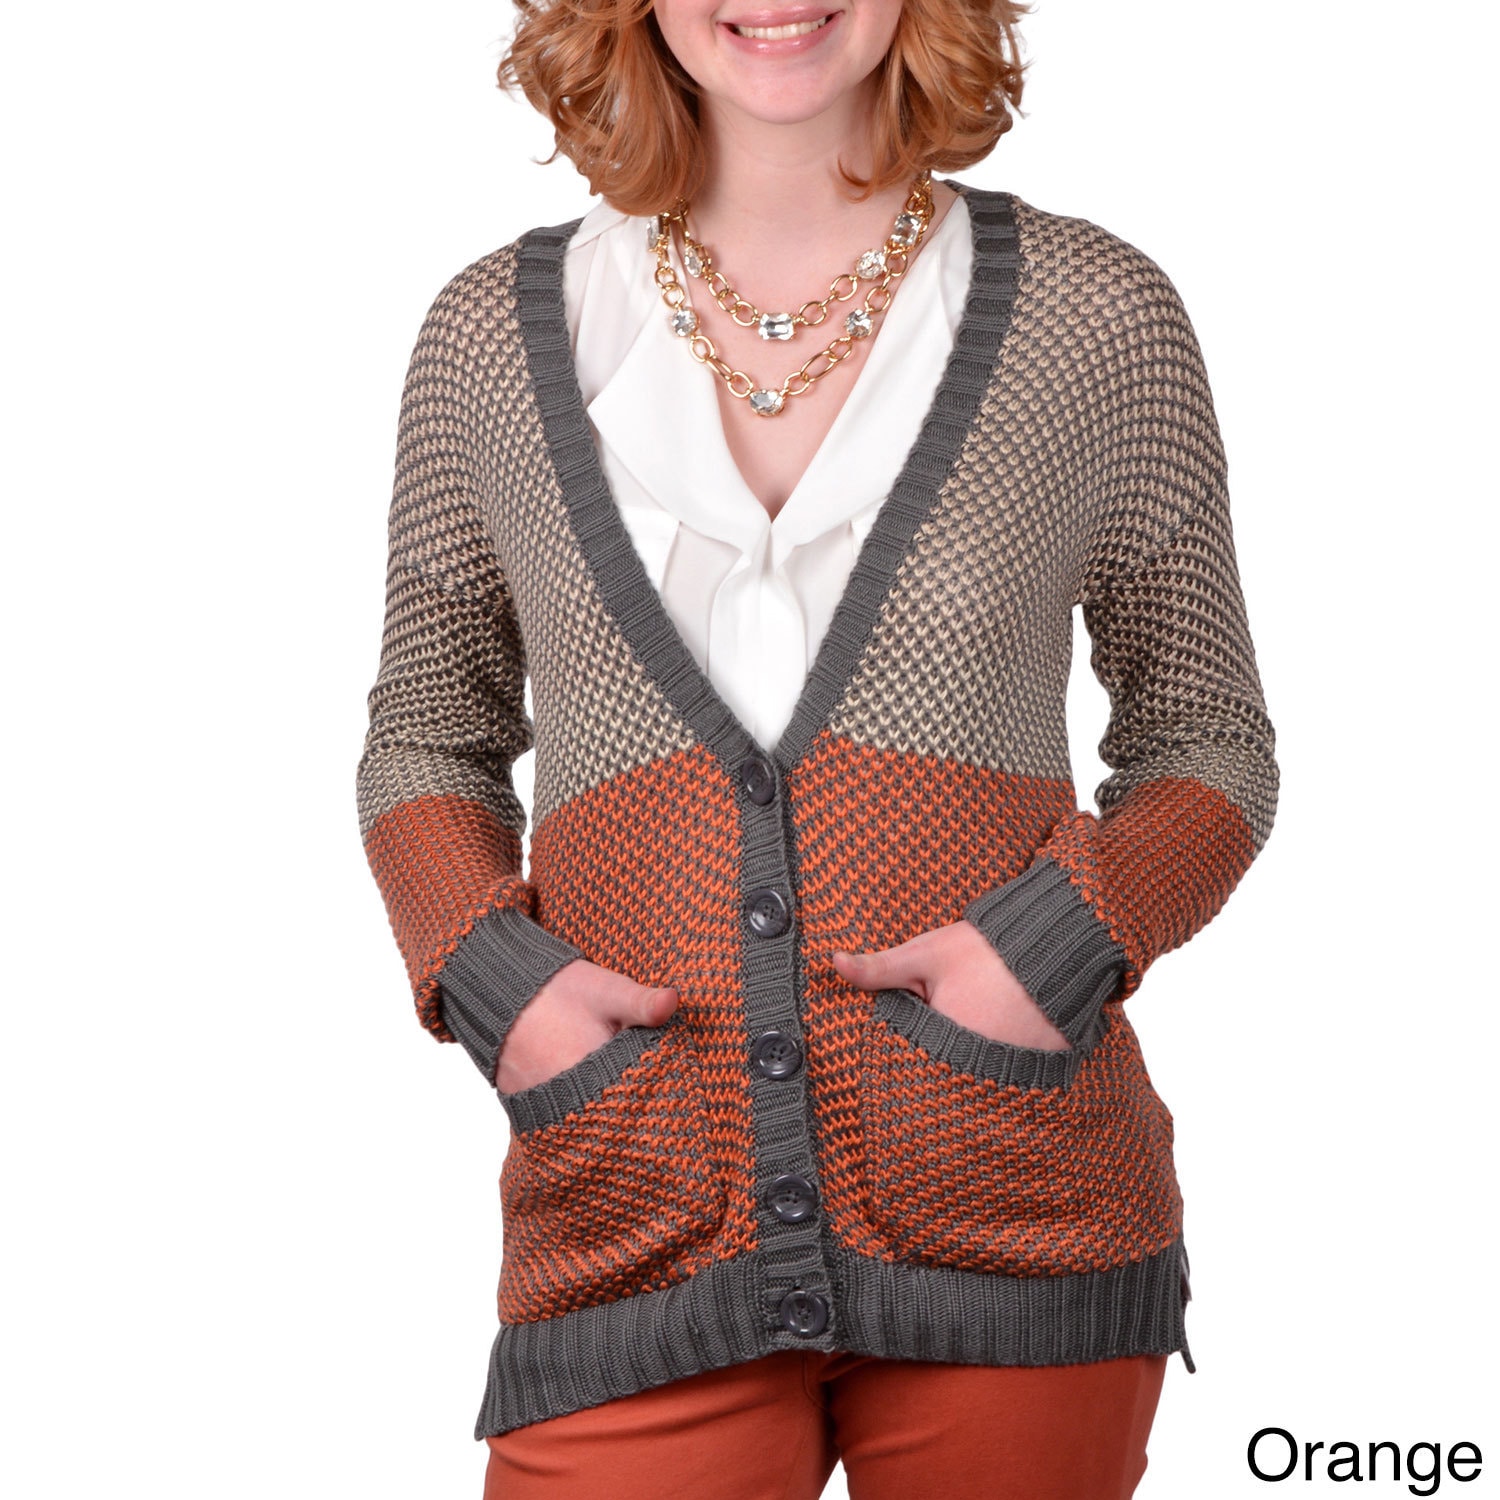 Journee Collection Journee Collection Juniors V neck Cardigan Sweater Orange Size S (1  3)